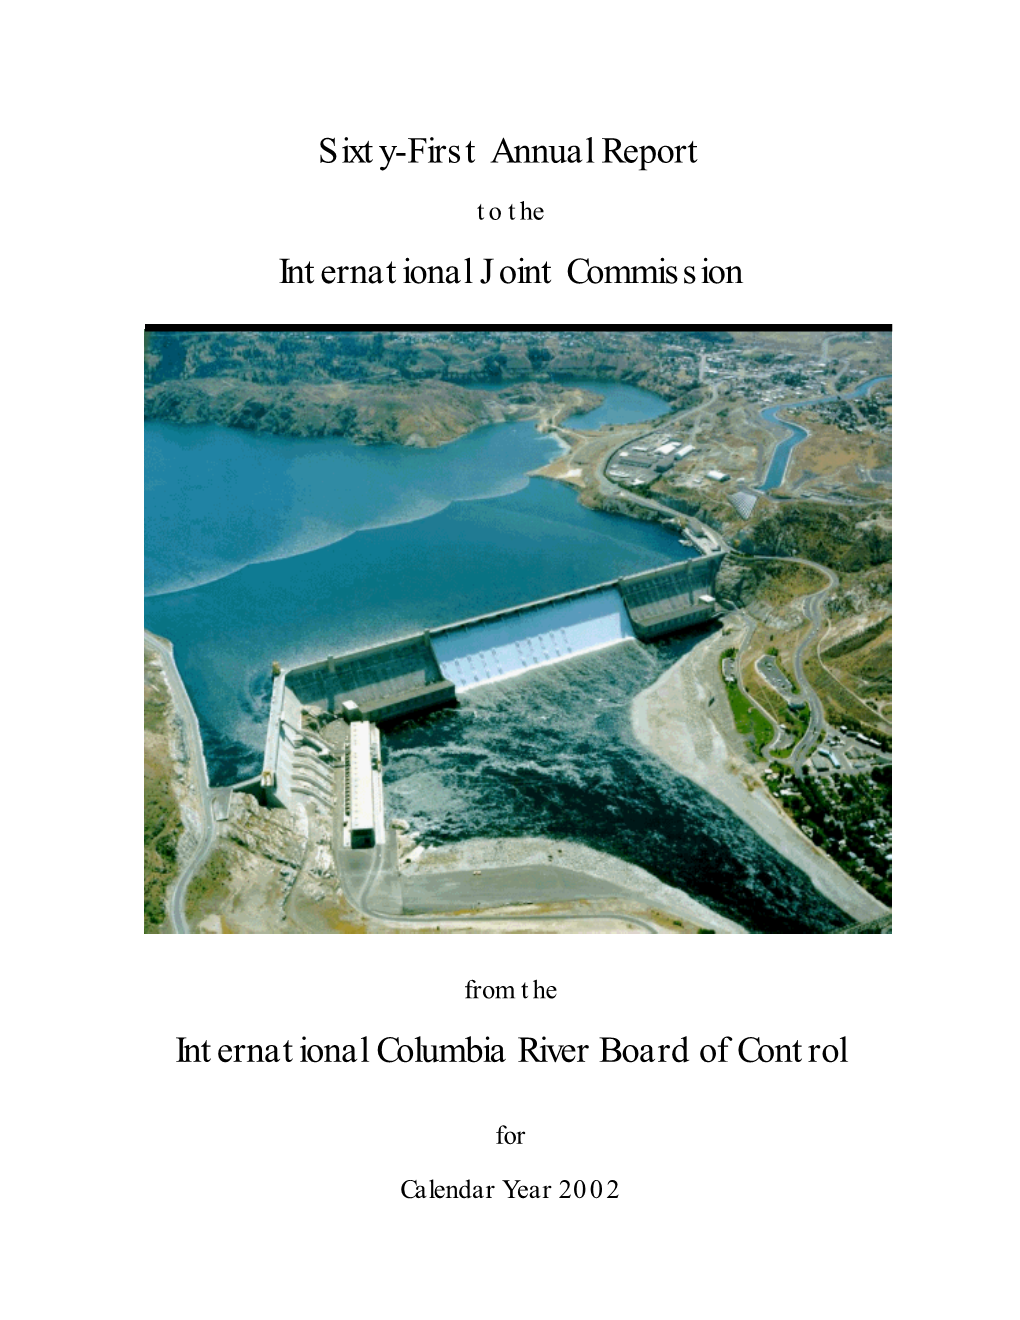 Sixty-First Annual Report International Joint Commission International Columbia River Board of Control